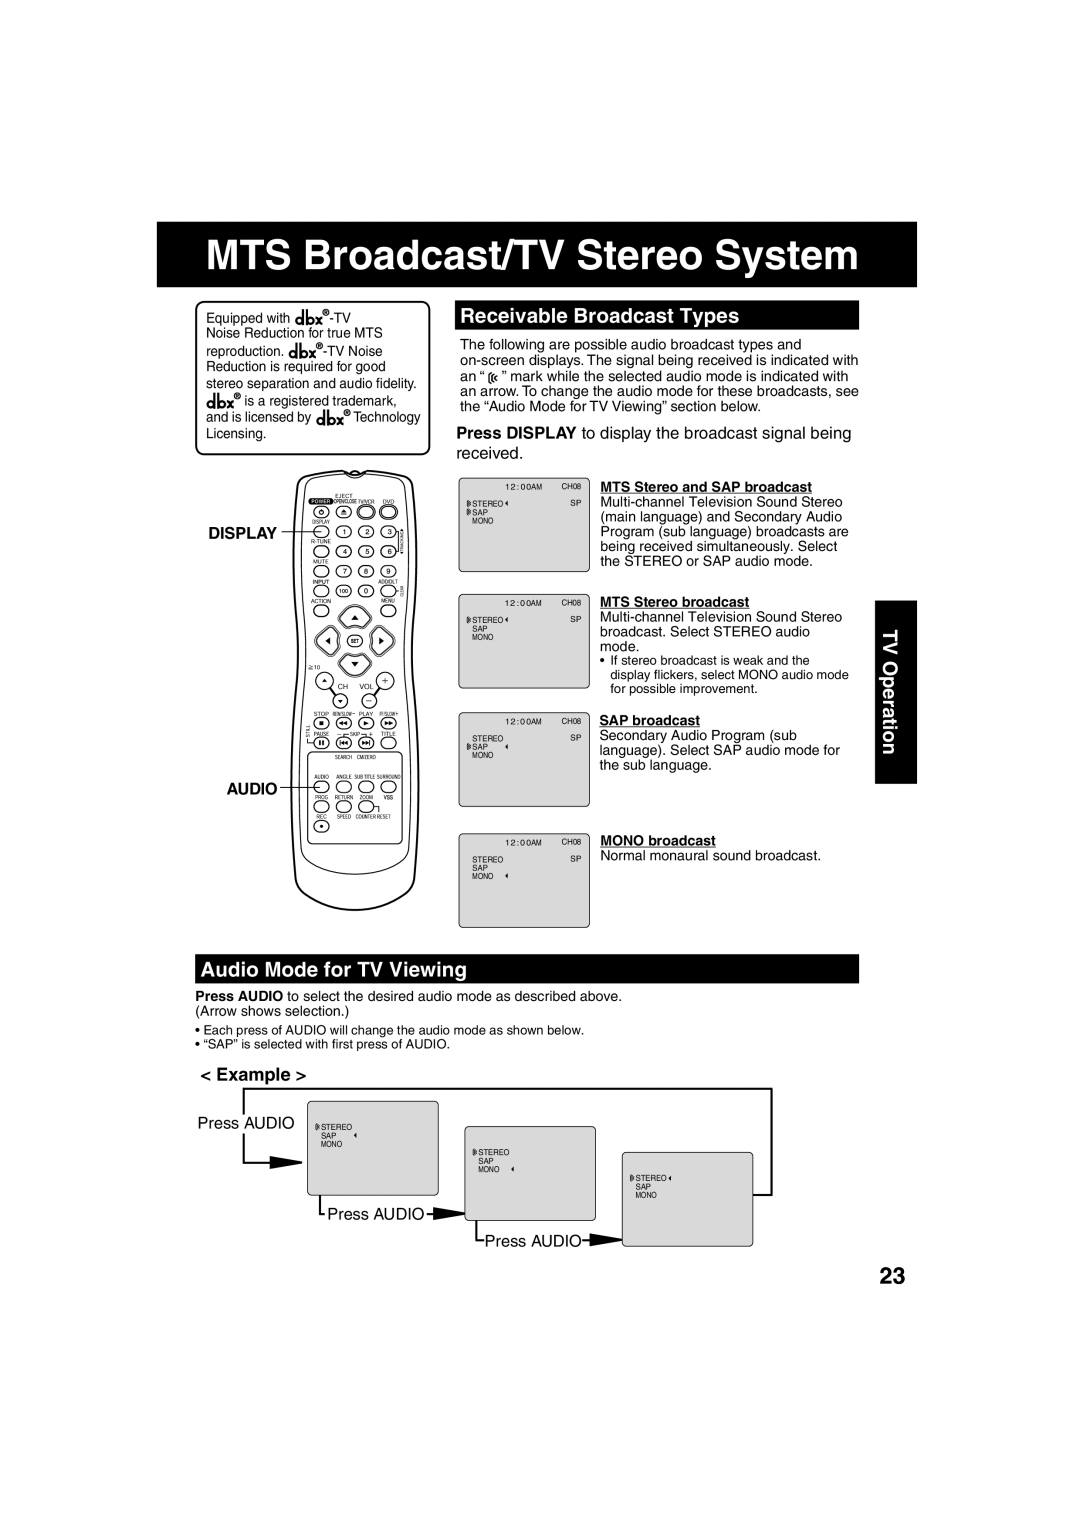 Panasonic PV-DF273 MTS Broadcast/TV Stereo System, Receivable Broadcast Types, TV Operation, Audio Mode for TV Viewing 